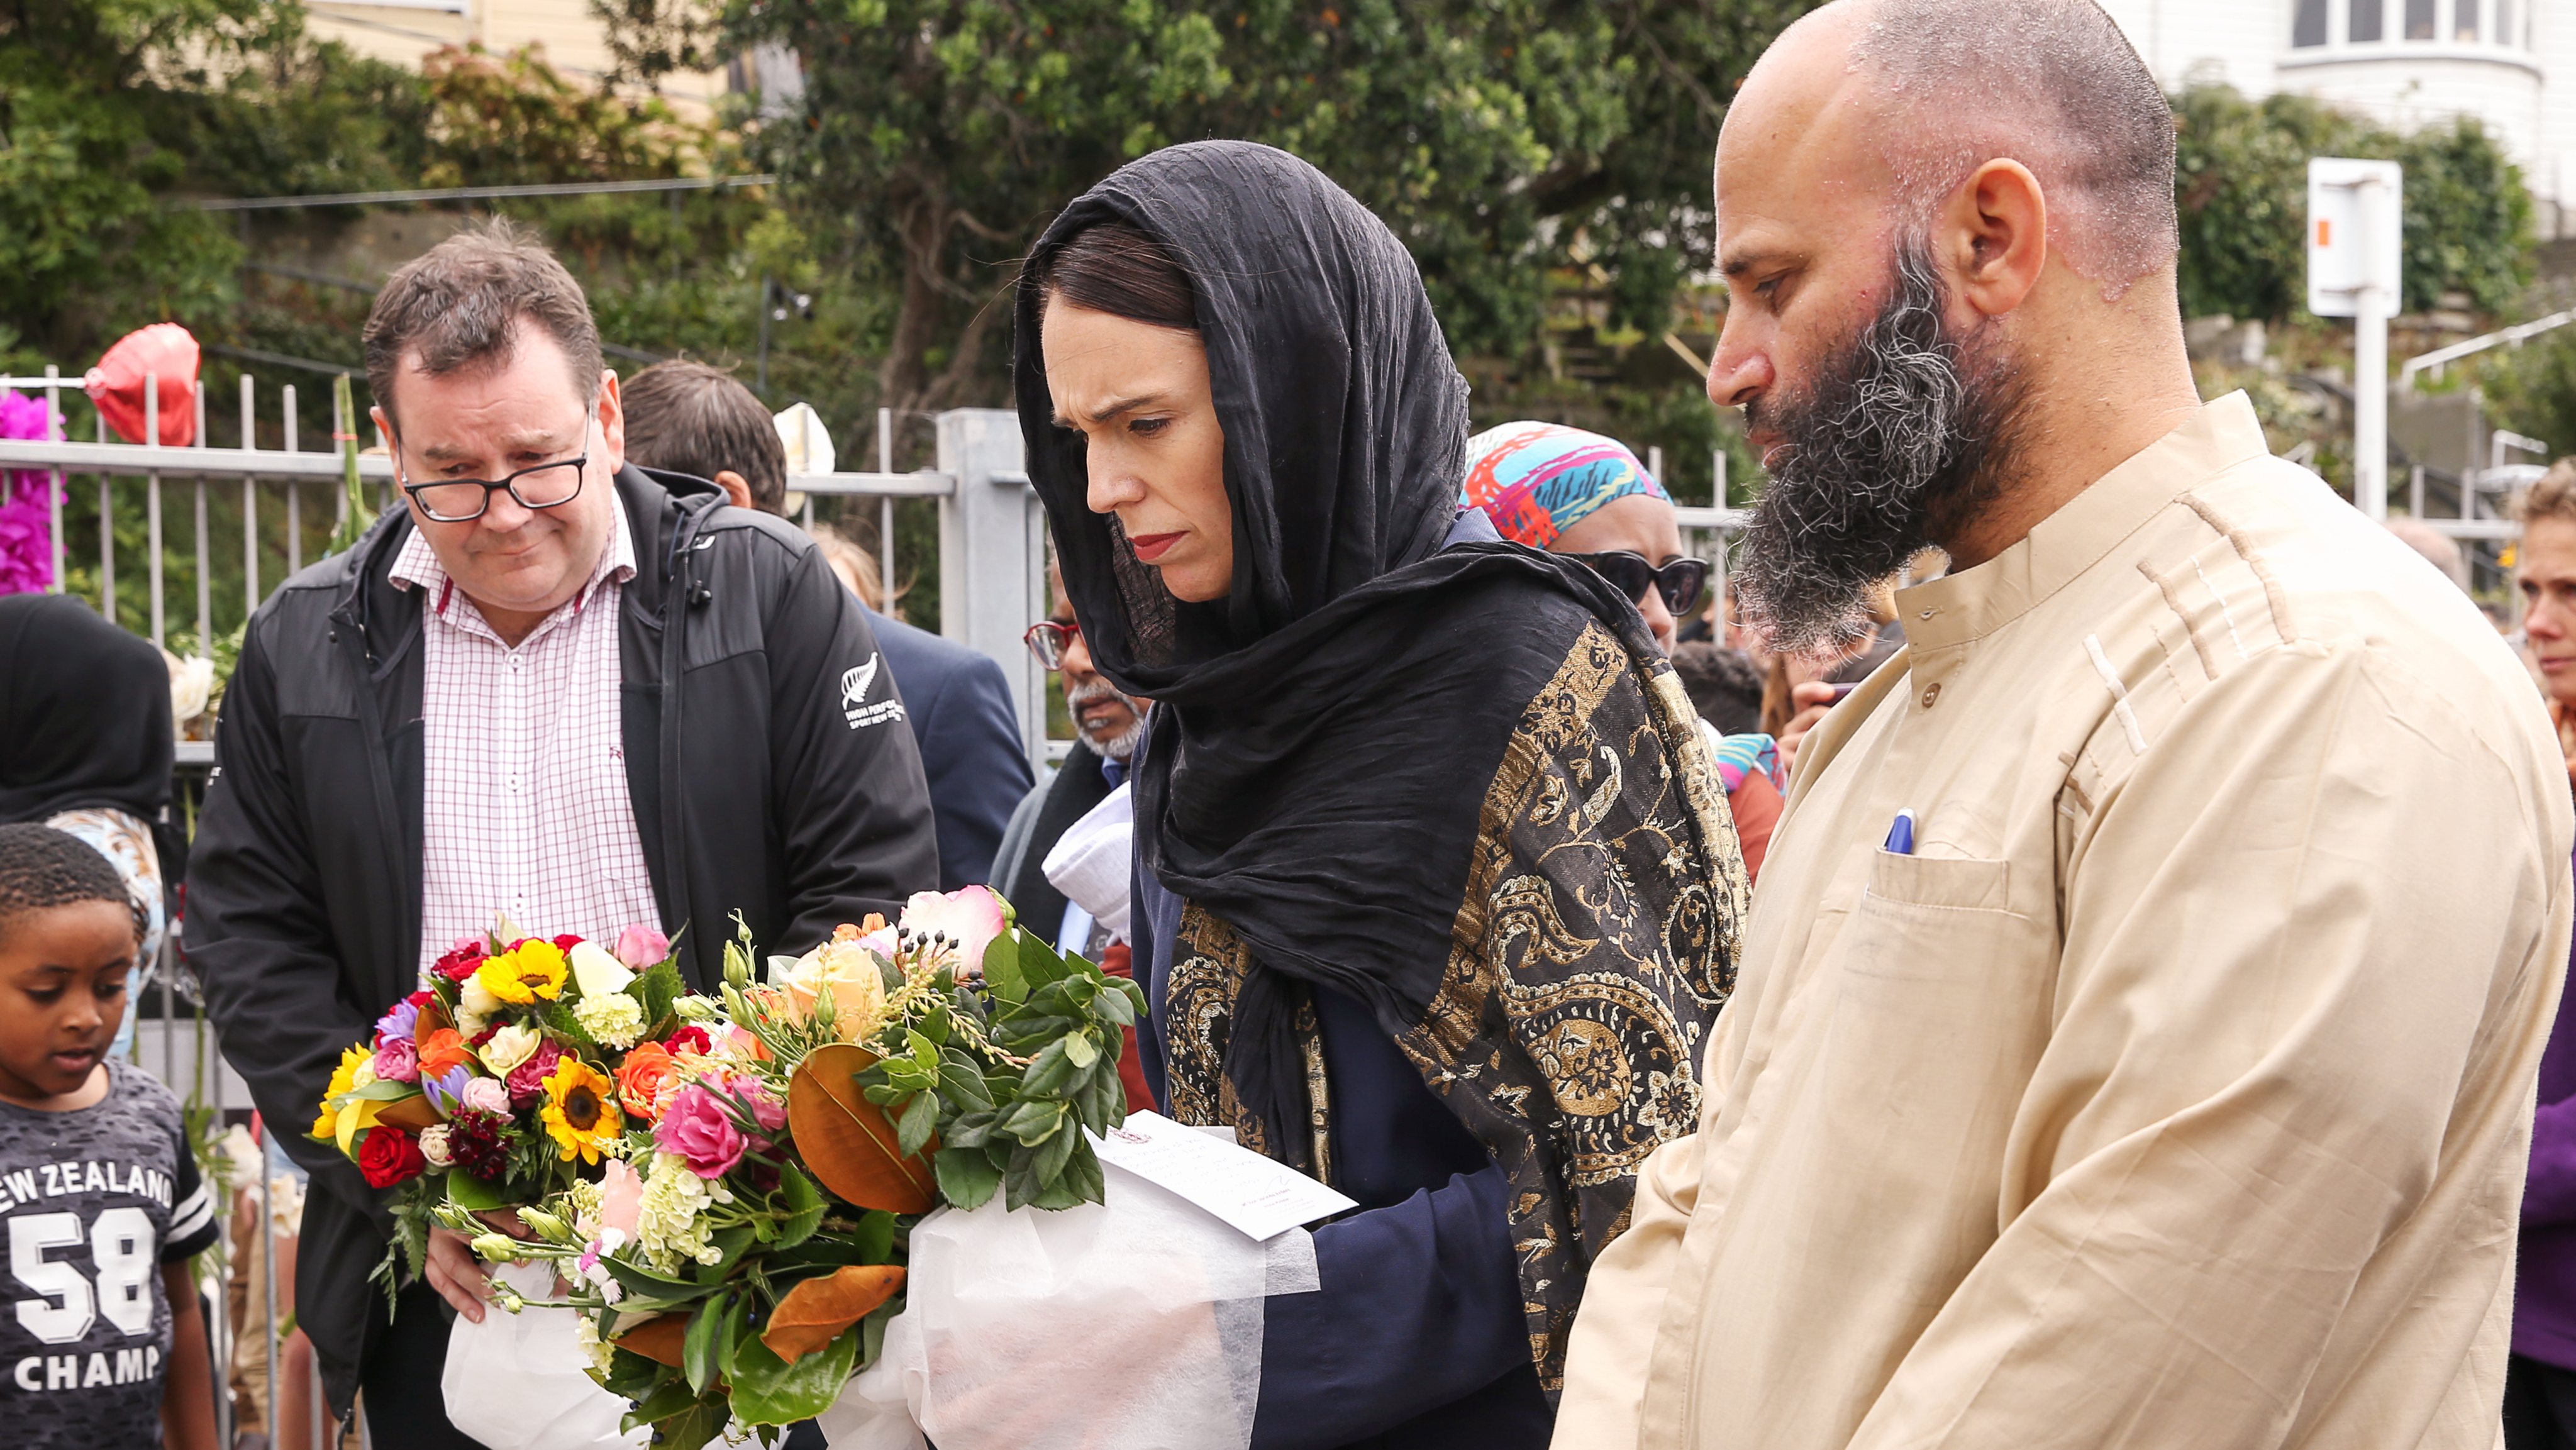 Prime Minister Ardern Lays Wreath And Visits With Islamic Community Leaders At Kilbirnie Mosque